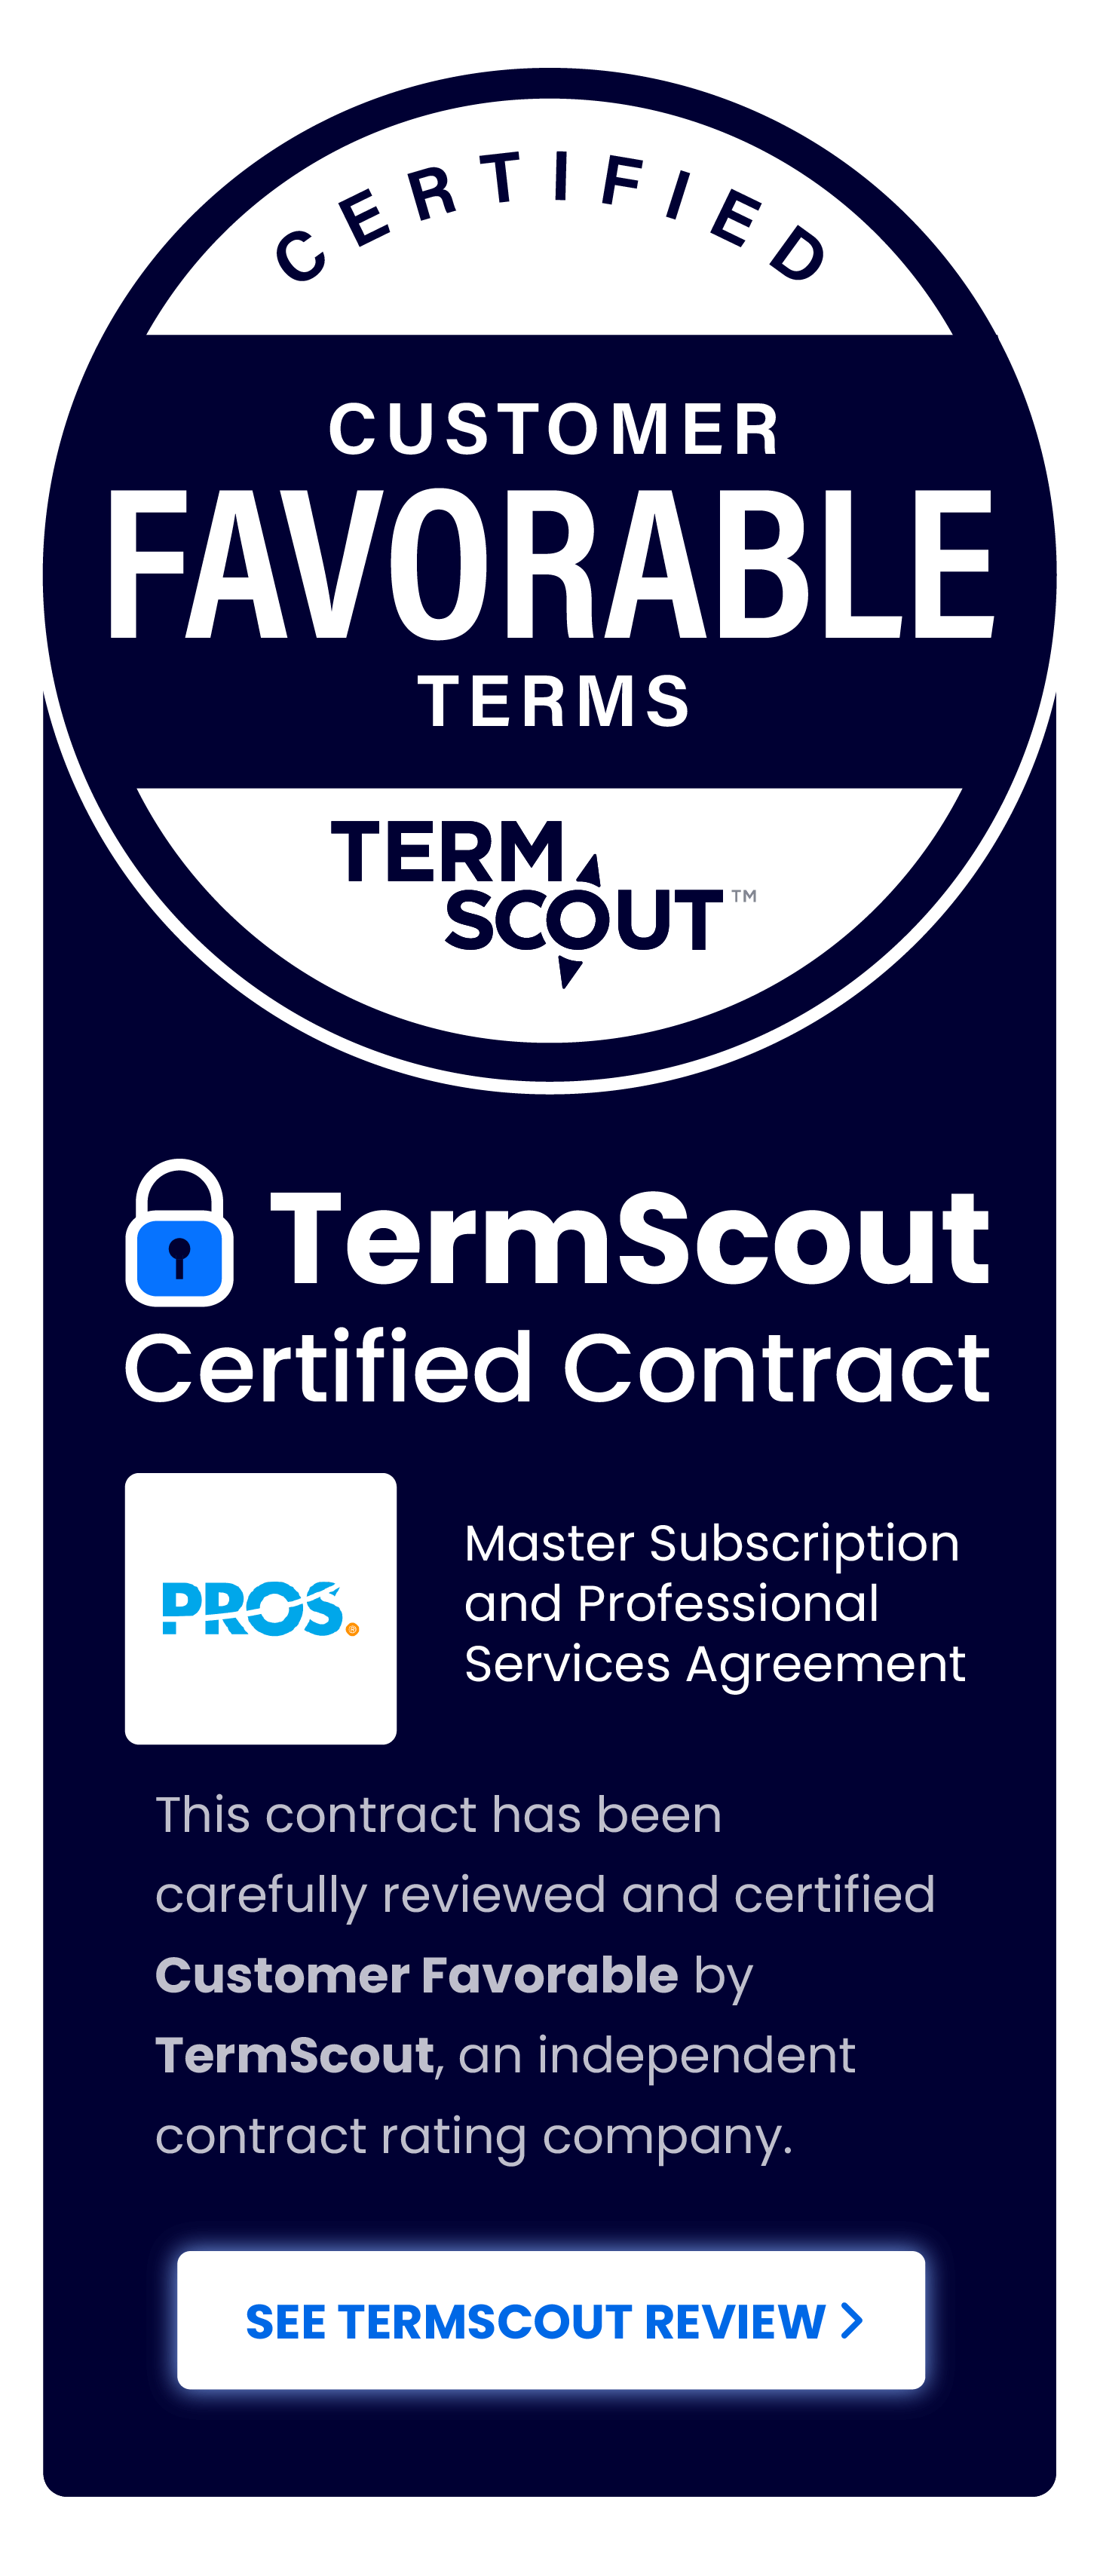 Customer favorable TermScout banner